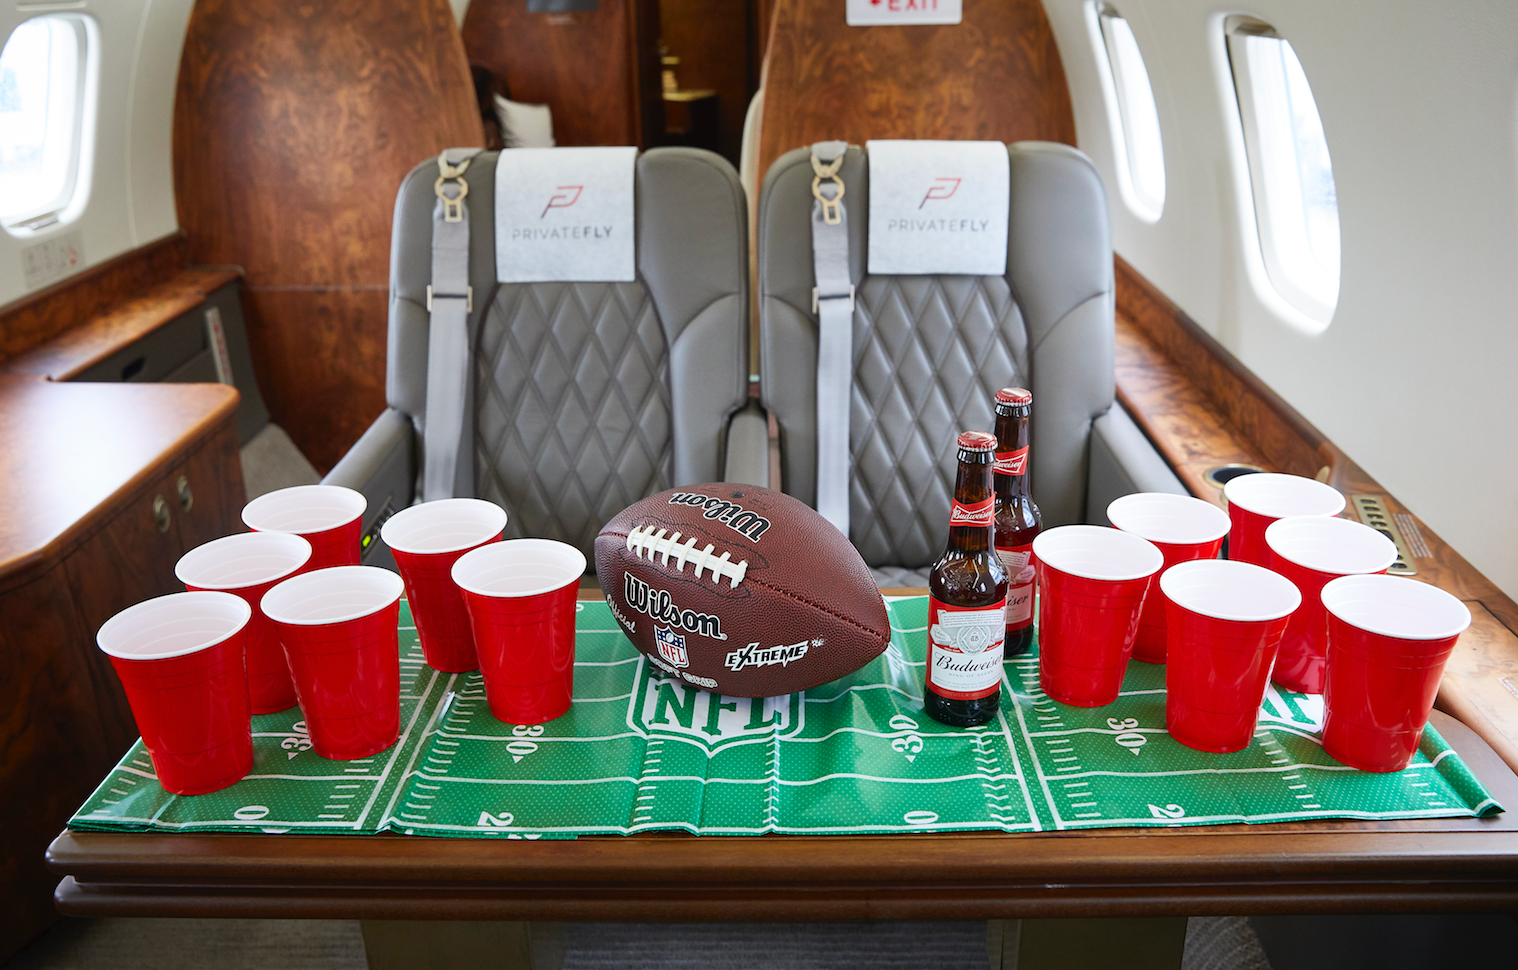 PrivateFly Launches Super Bowl 2020 Private Jet Party